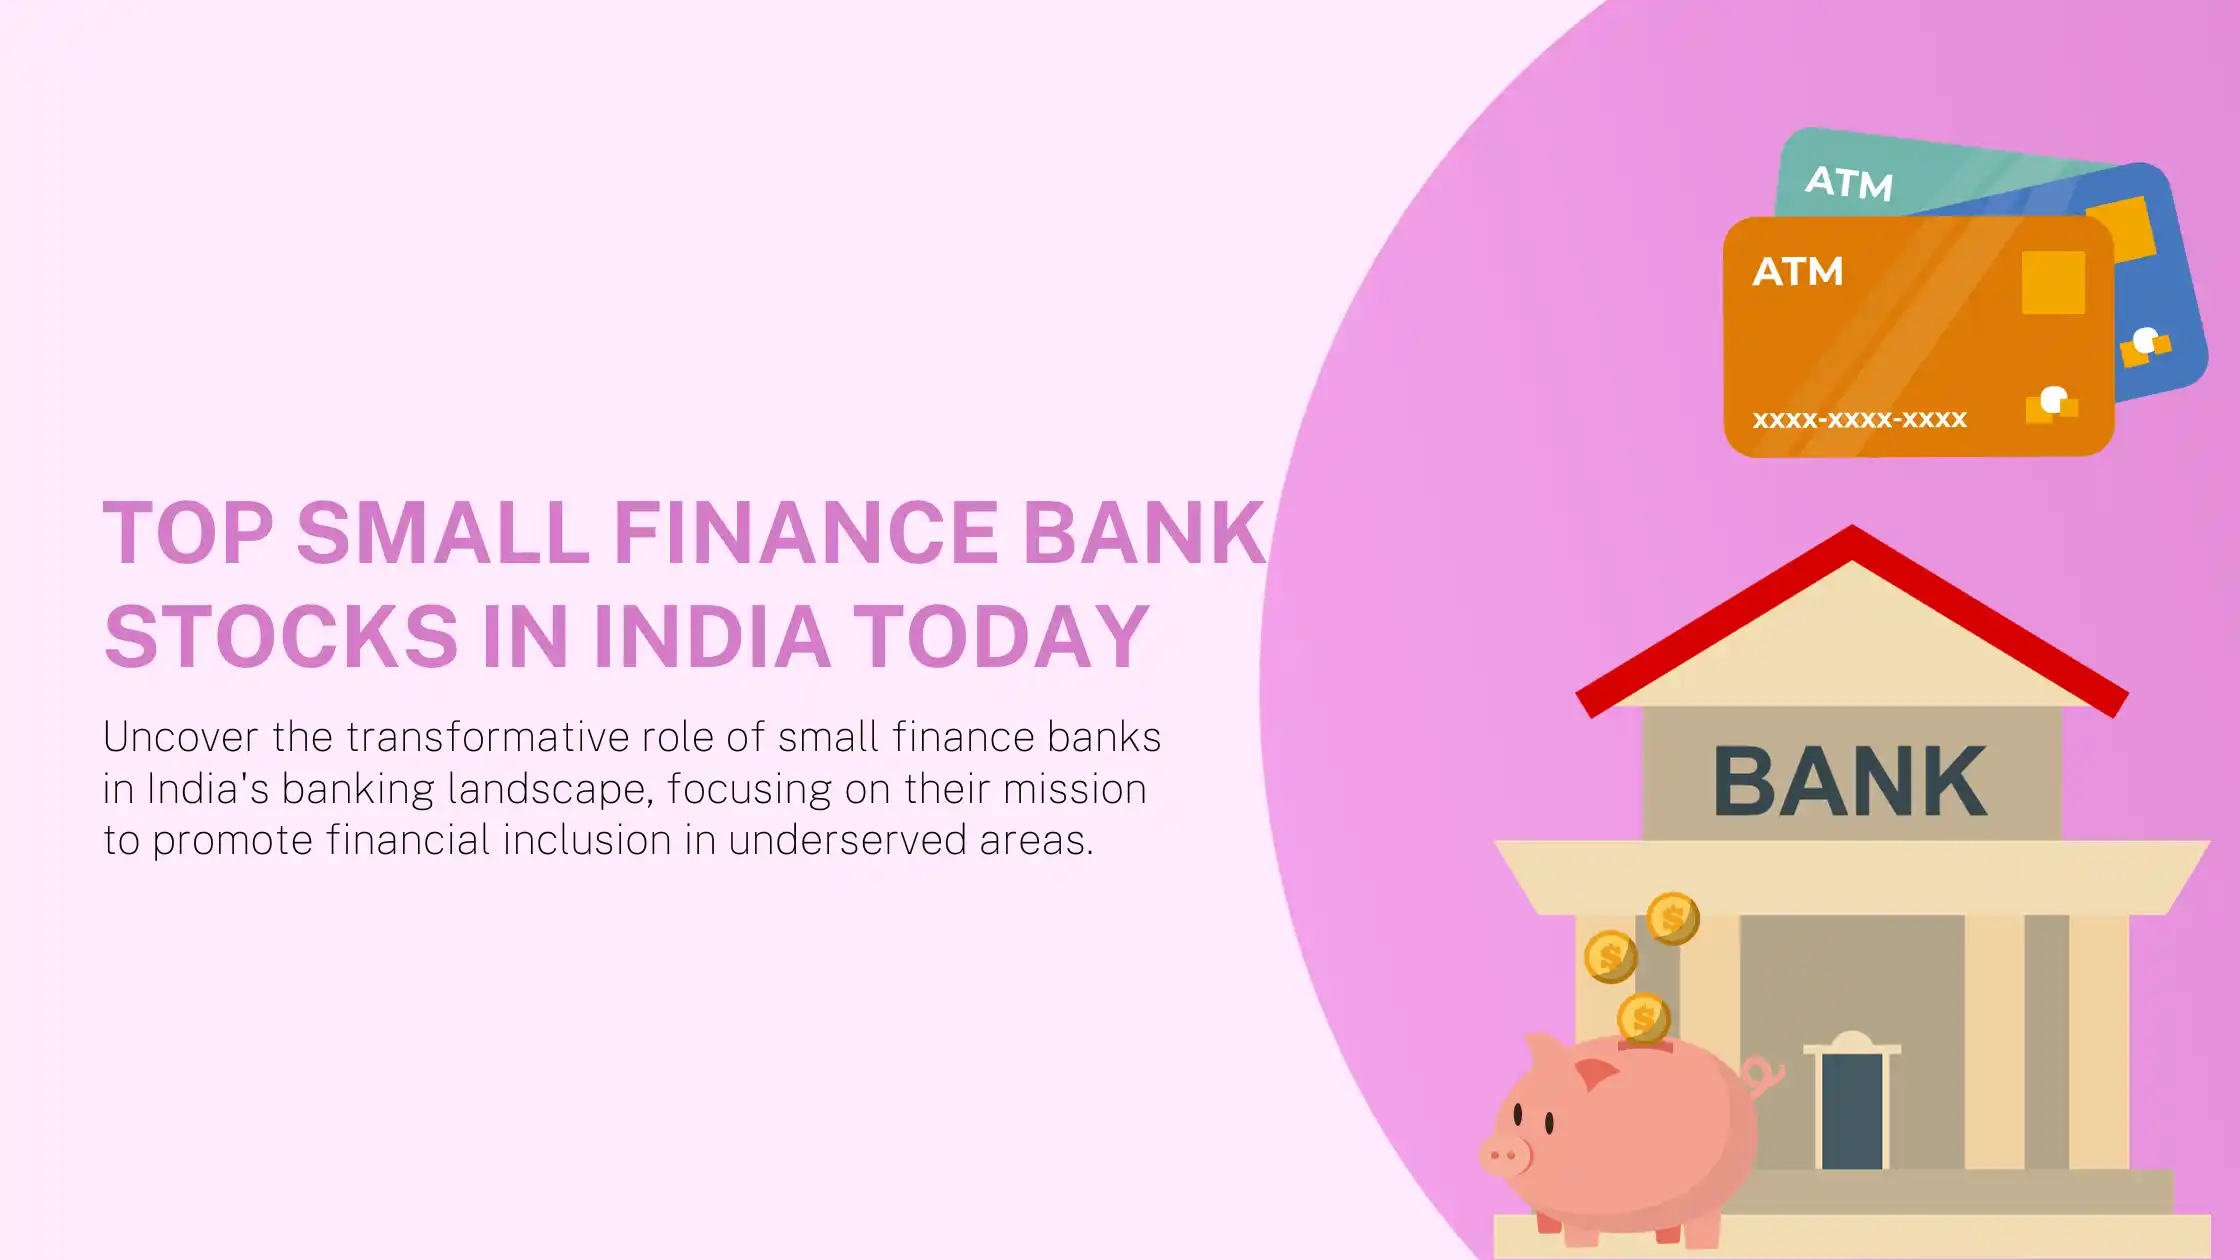 Top Small Finance Bank Stocks in India Today